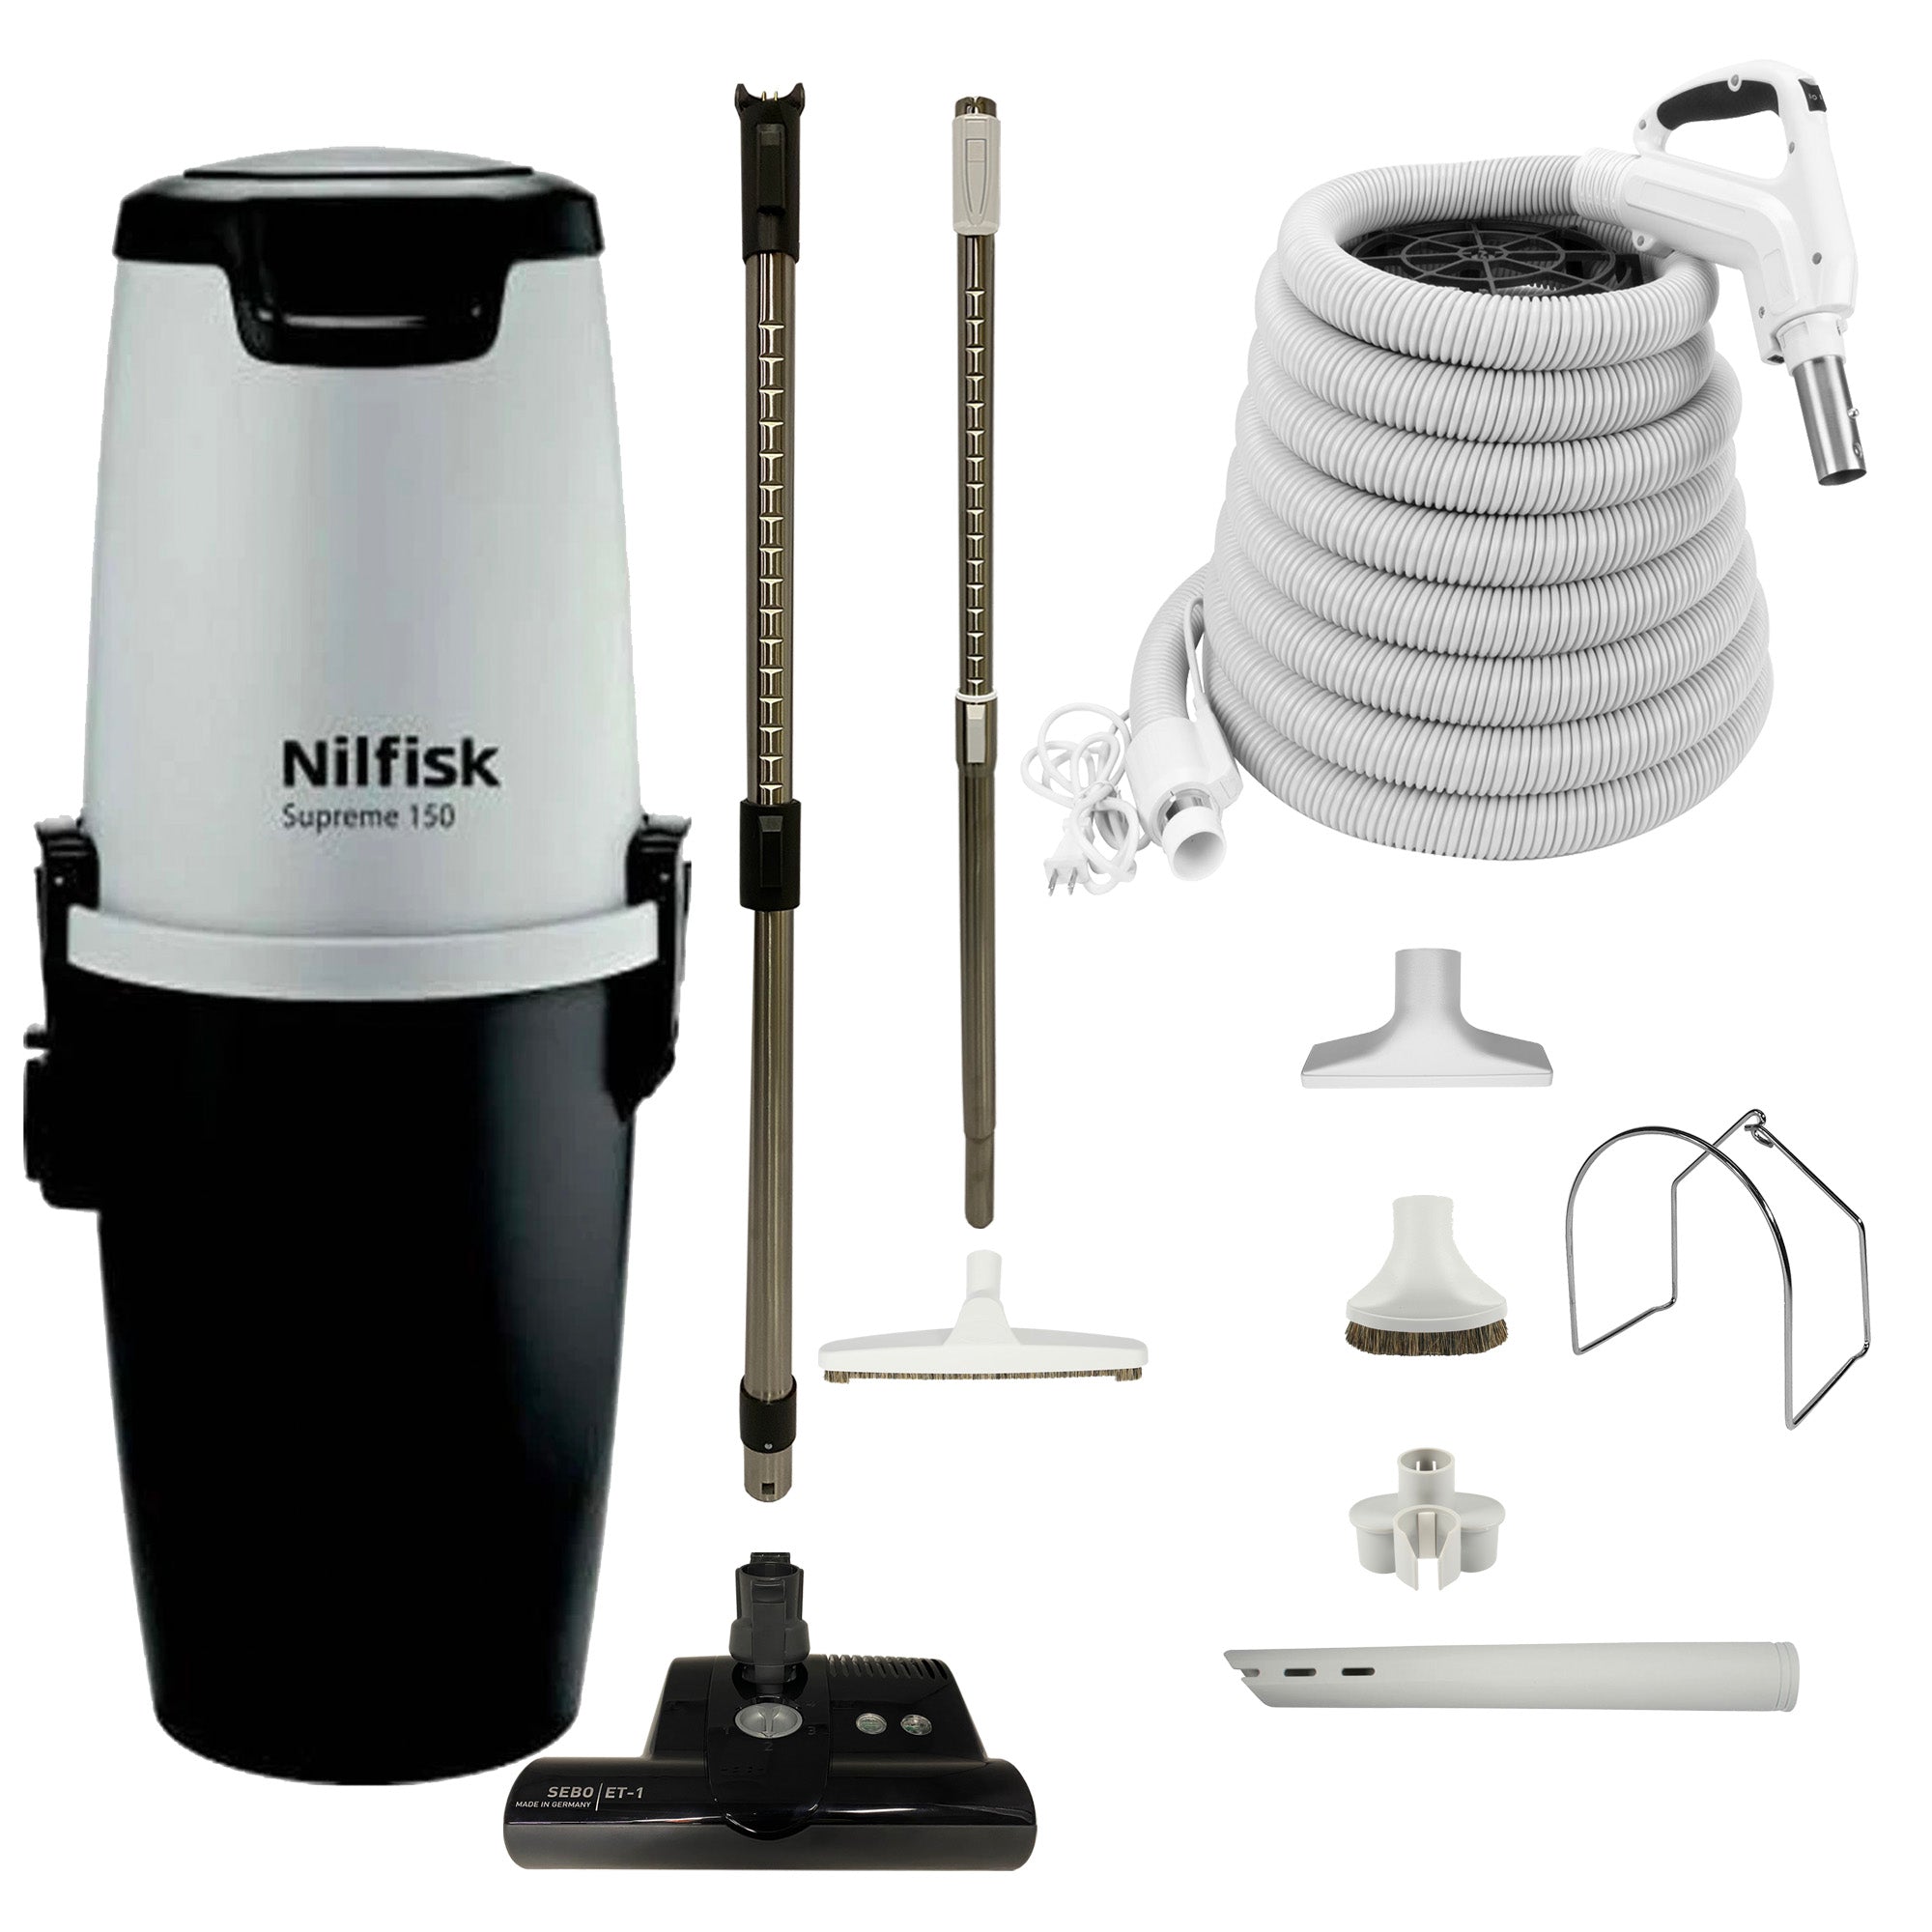 Nilfisk Supreme 150 Central Vacuum with Black SEBO ET-1 Powerhead and Premium Electric Package - White